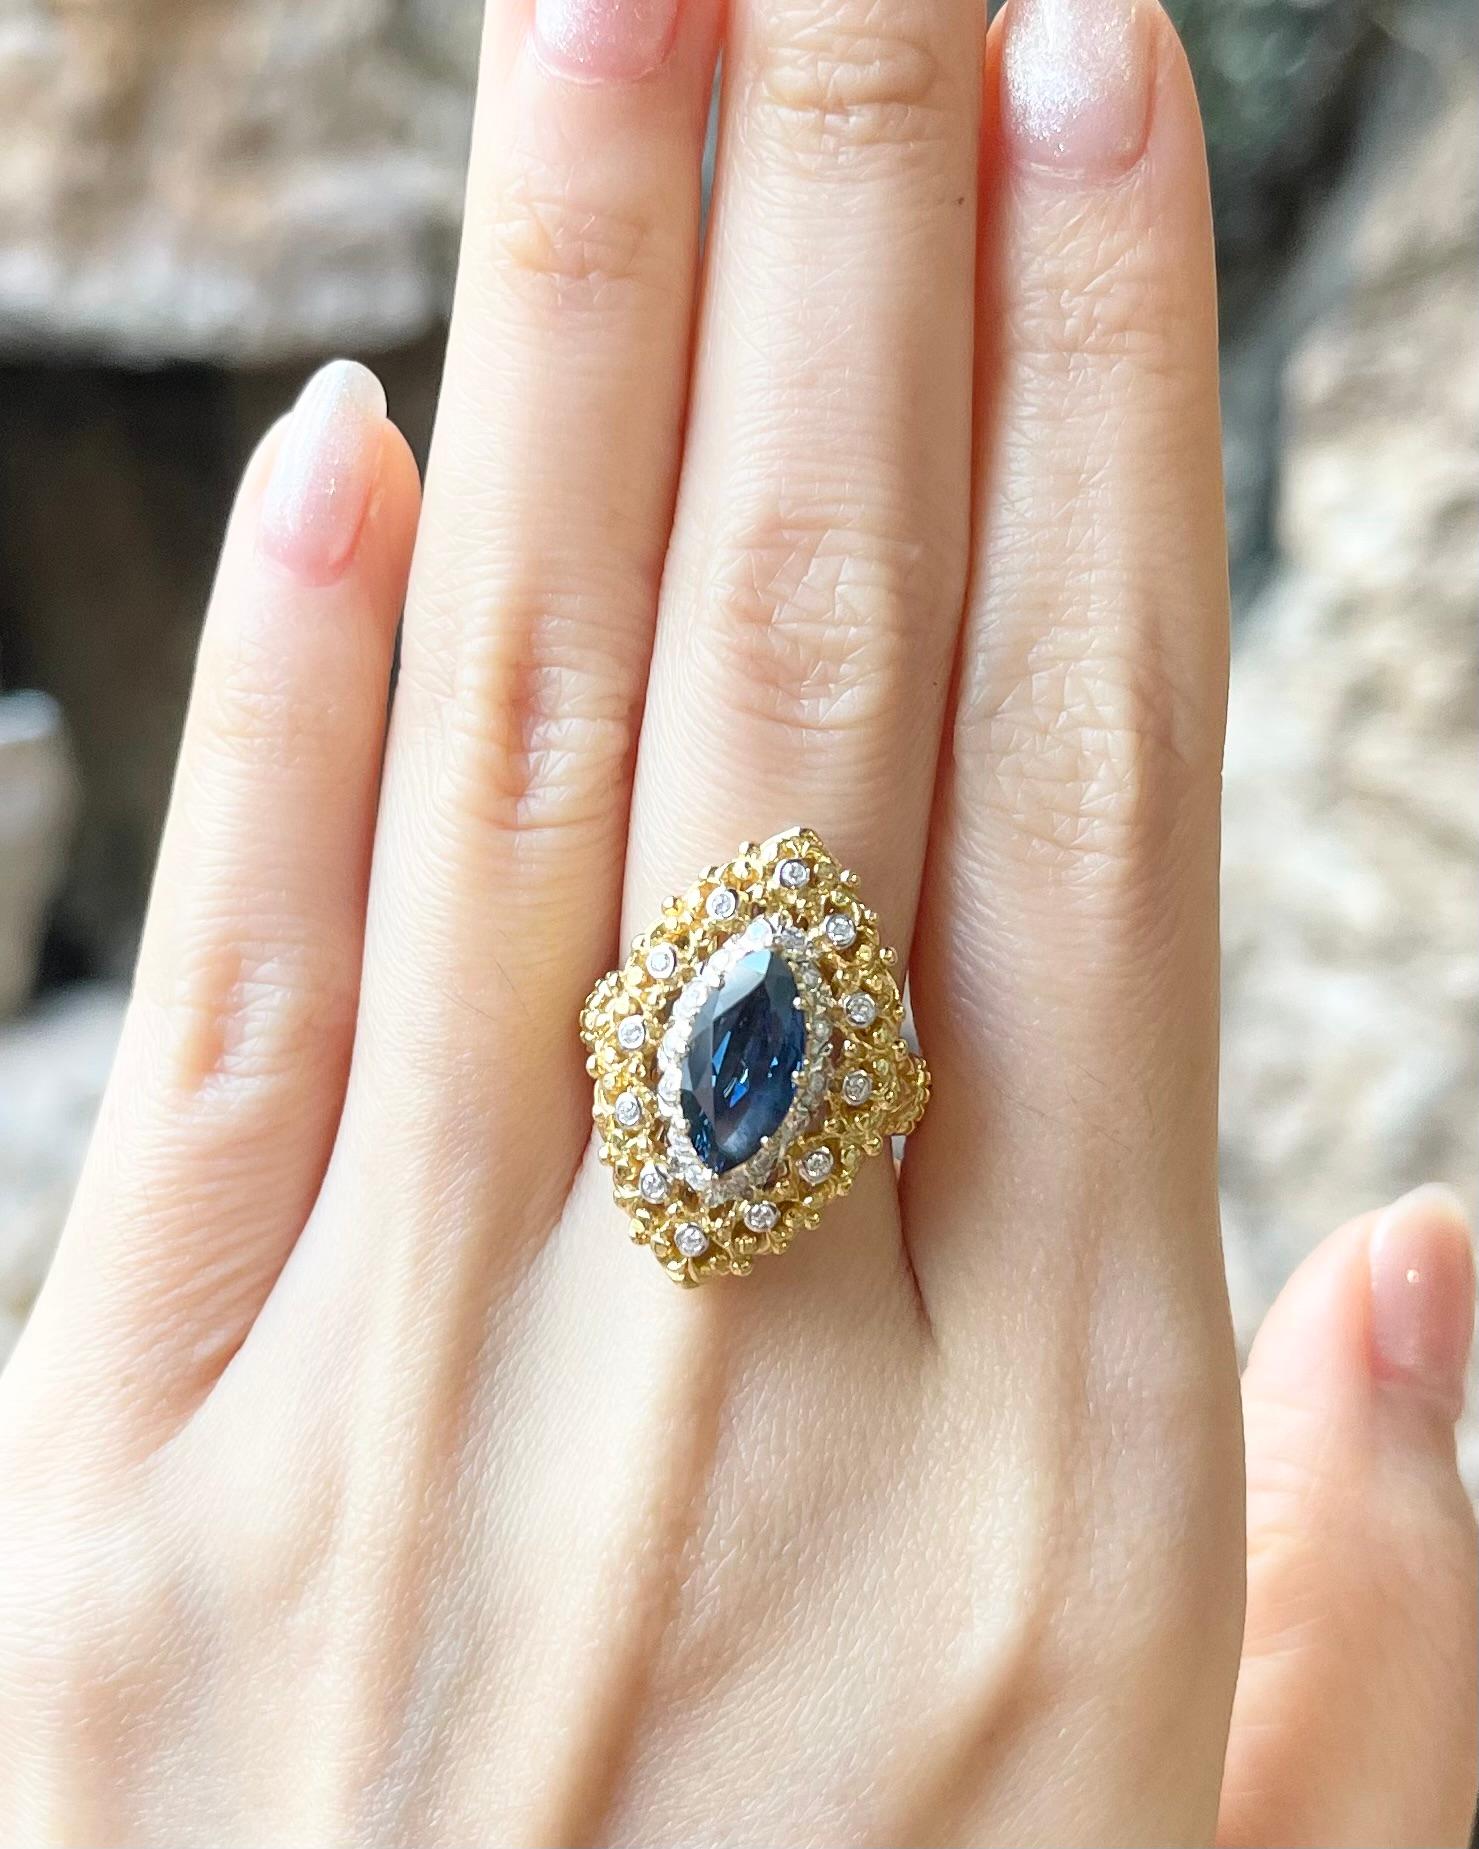 Blue Sapphire 2.53 carats with Diamond 0.26 carat Ring set in 18K Gold Settings

Width:  1.6 cm 
Length: 2.5 cm
Ring Size: 53
Total Weight: 10.45 grams

